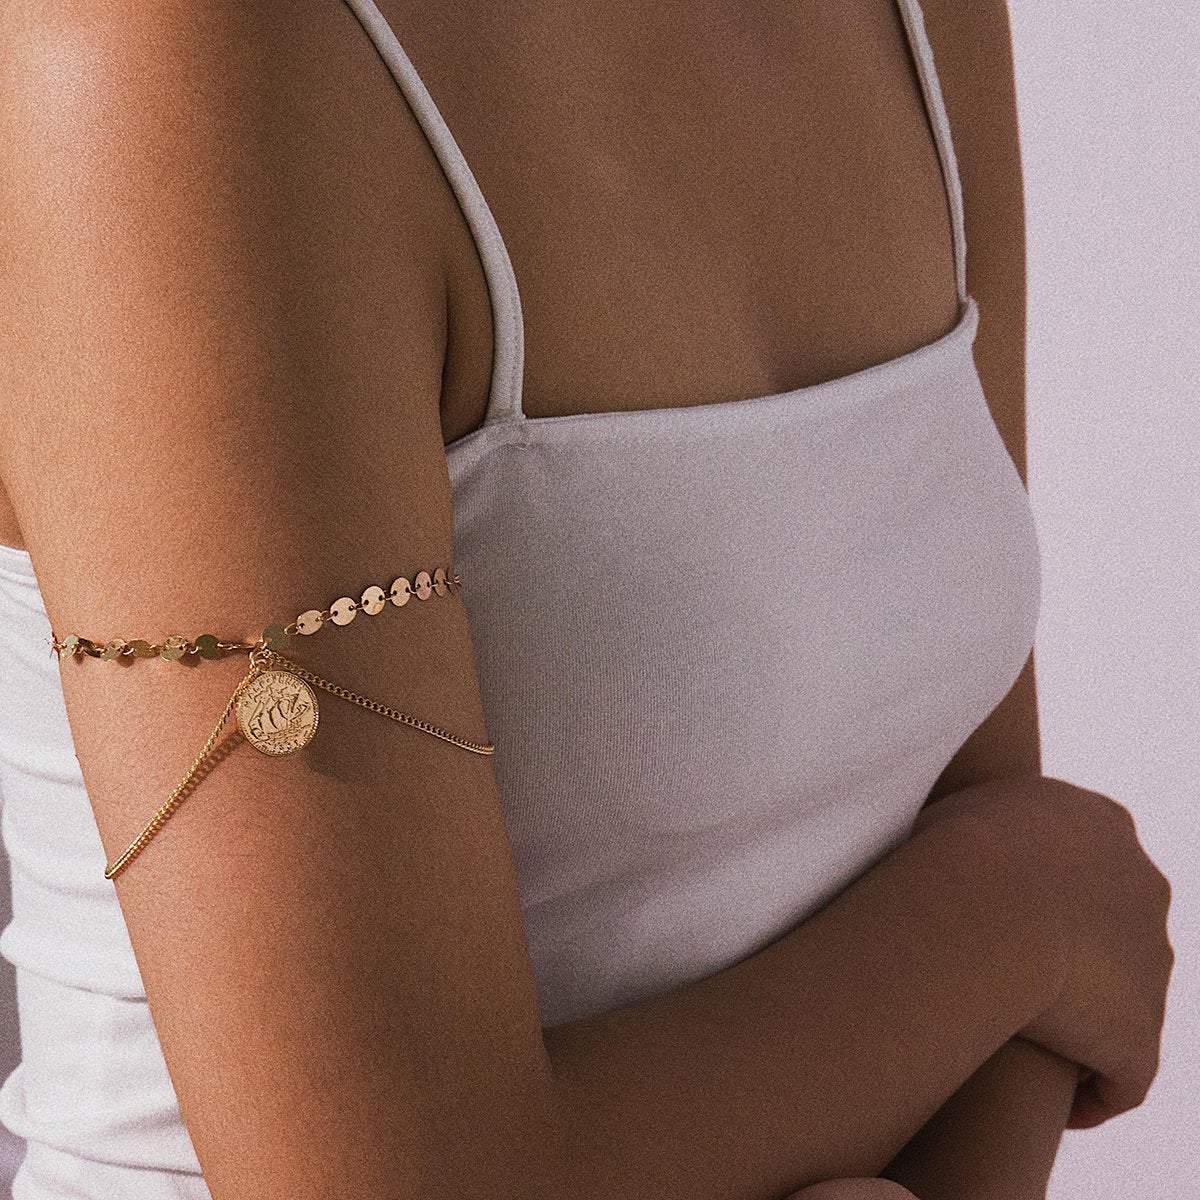 Minimalist Layered Relief Coin Pendant Sequins Arm Cuff - Chic Gold Silver Tone Sequins Chain Cuff Bracelet - Layered Upper Arm Band